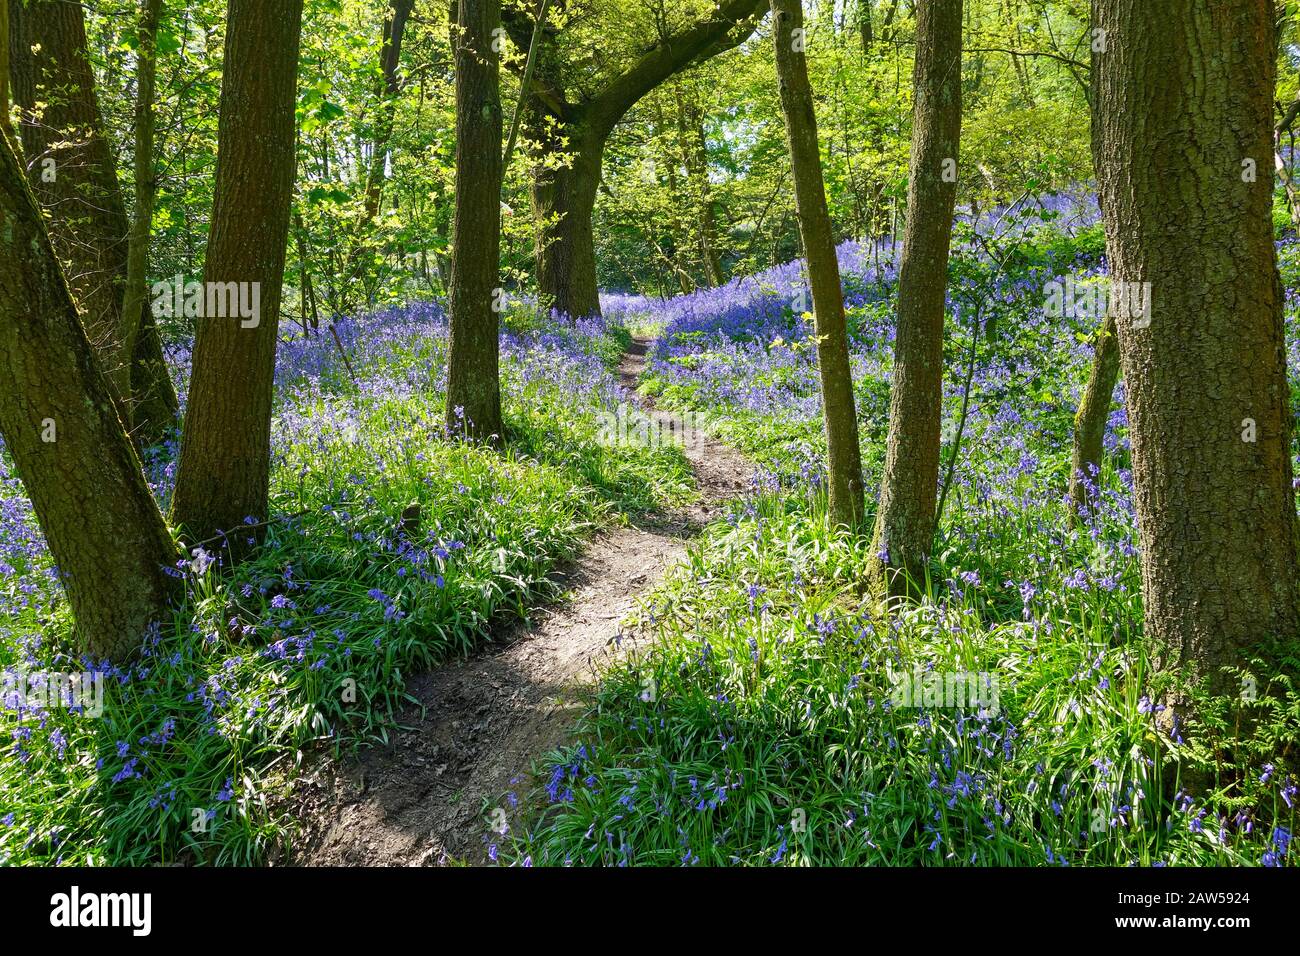 Common Bluebells (Hyacinthoides non-scripta) with a footpath through an English wood with Beech fagus trees leaves green spring, England, UK Stock Photo